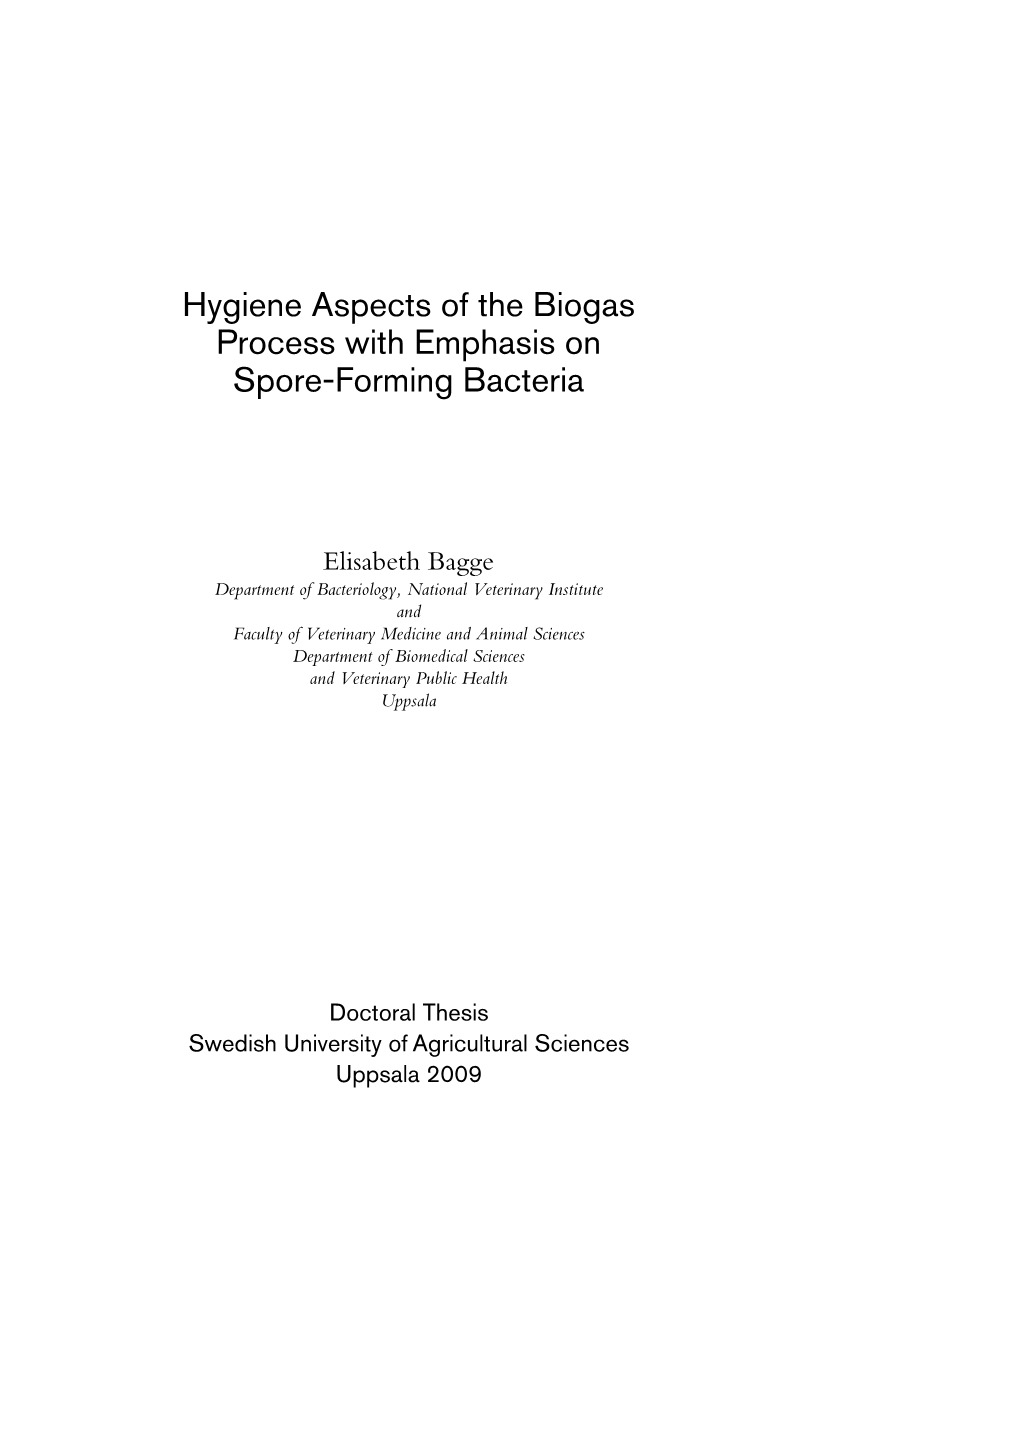 Hygiene Aspects of the Biogas Process with Emphasis on Spore-Forming Bacteria